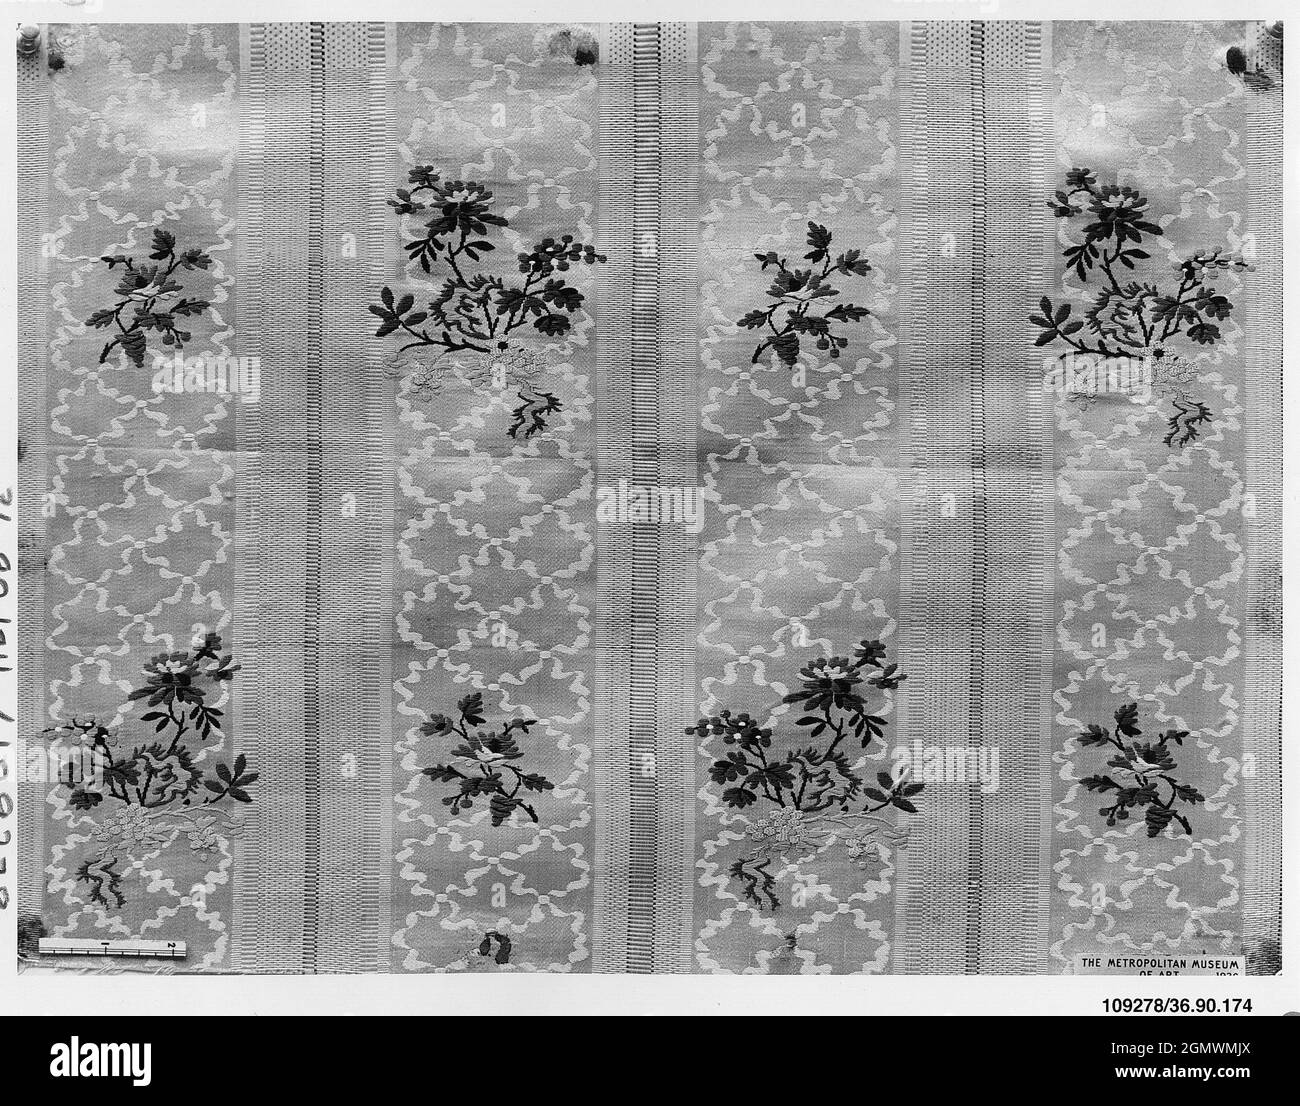 Piece. Date: 18th century; Culture: French; Medium: Silk; Dimensions: L. 19 1/4 x W. 14 inches; Classification: Textiles-Woven Stock Photo